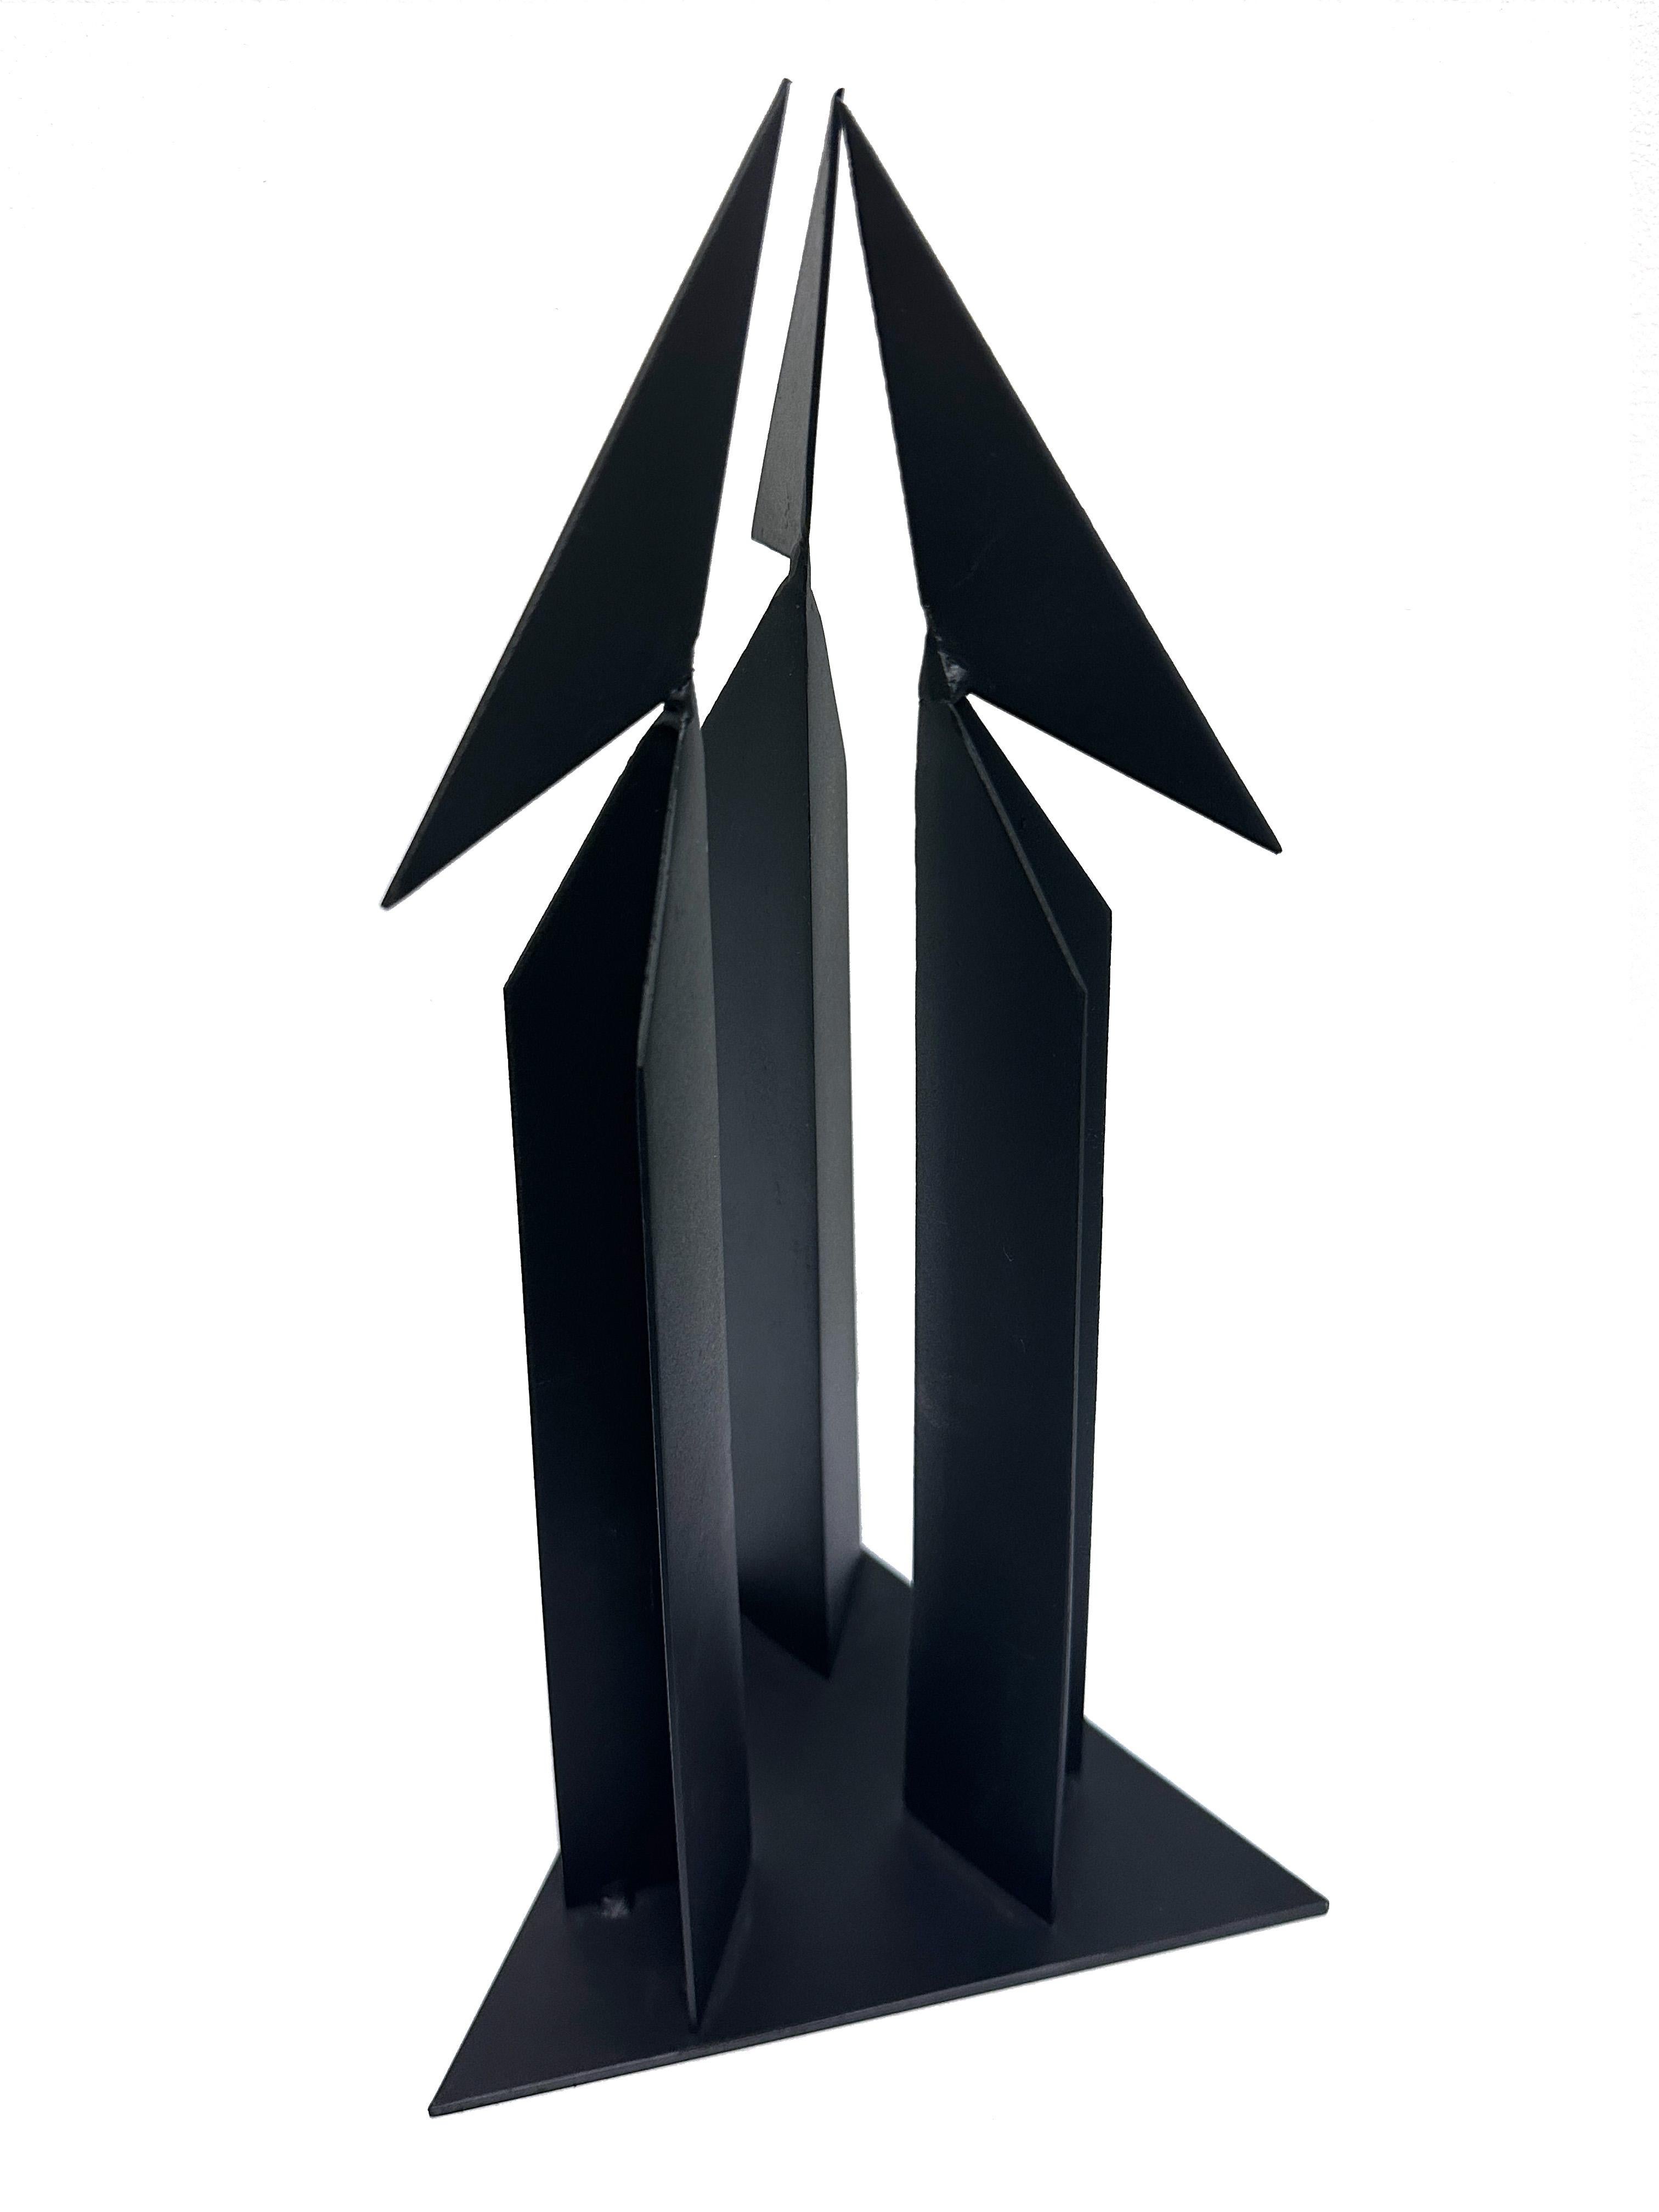 Model for Americas Tower by the American Postwar & Contemporary artist Peter Lobello. Titled 